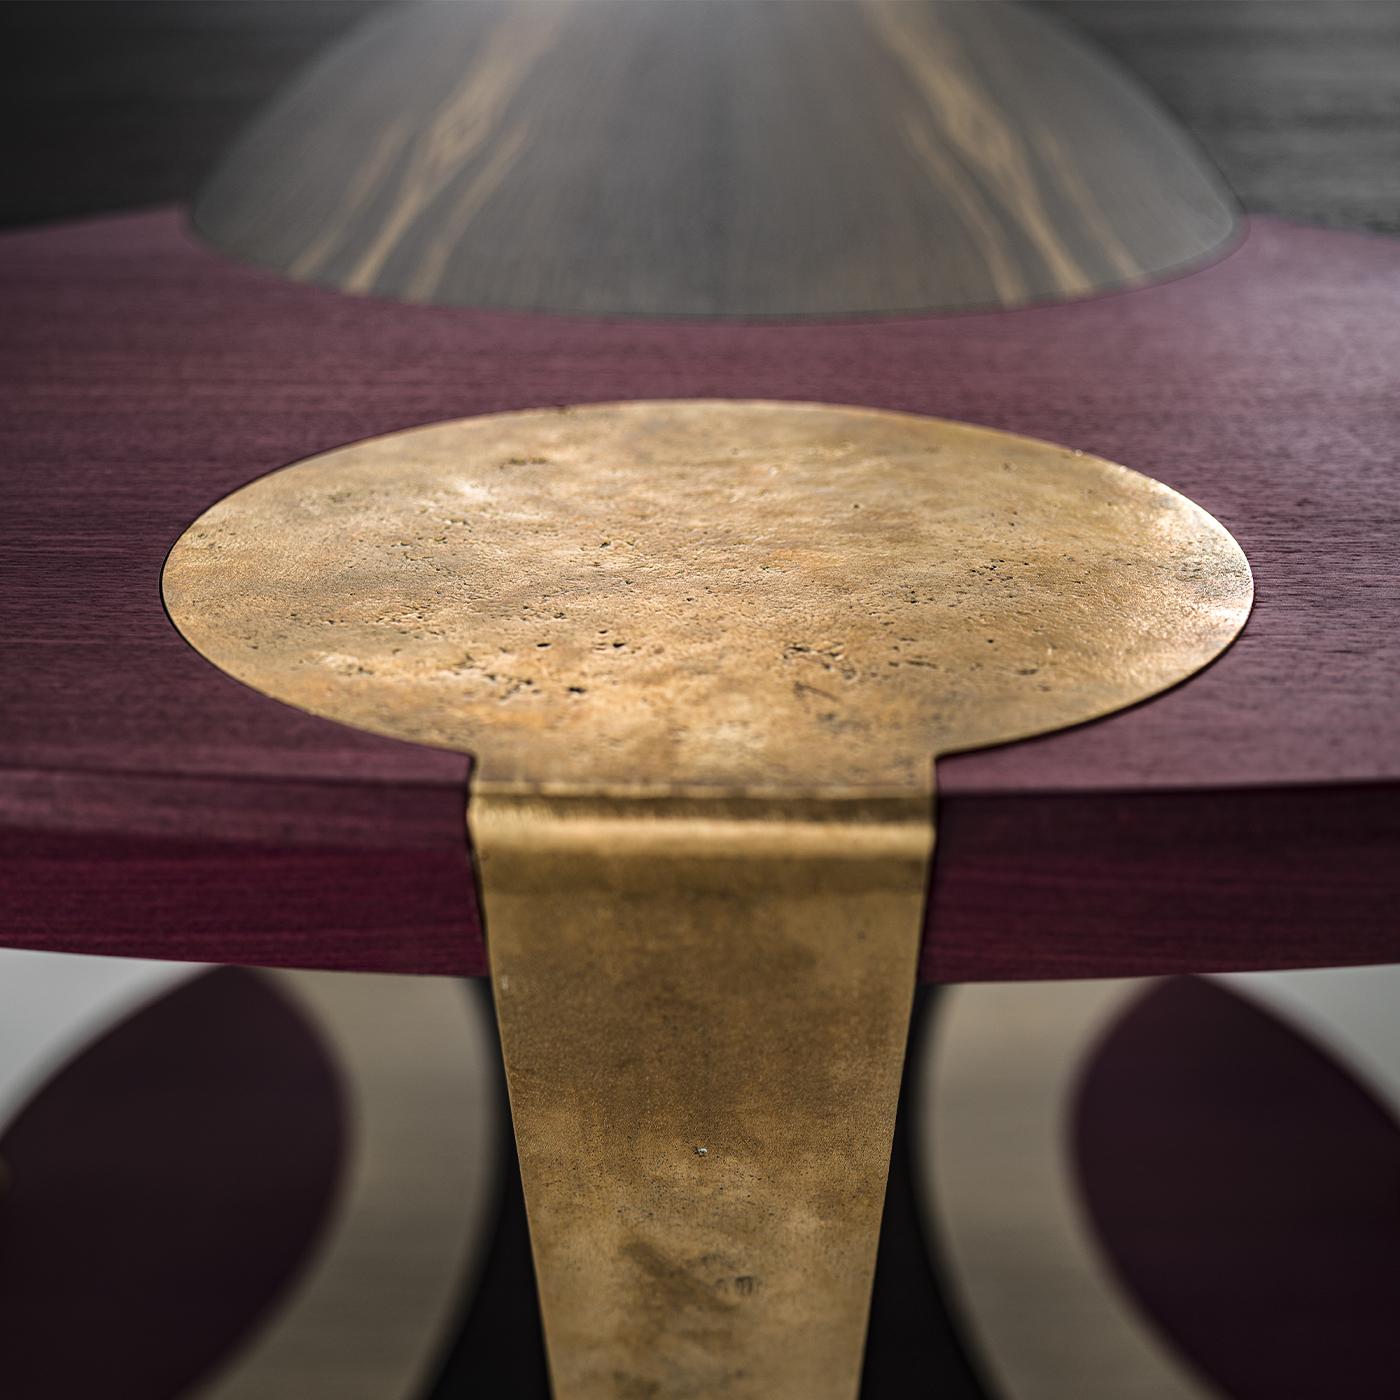 Atlas table owes its name to Atlas, the titan who supports the entire celestial vault. It features large cast-bronze “arms” and round “hands” supporting the wide top, coloured with a skilful use of splendid natural wood veneers.